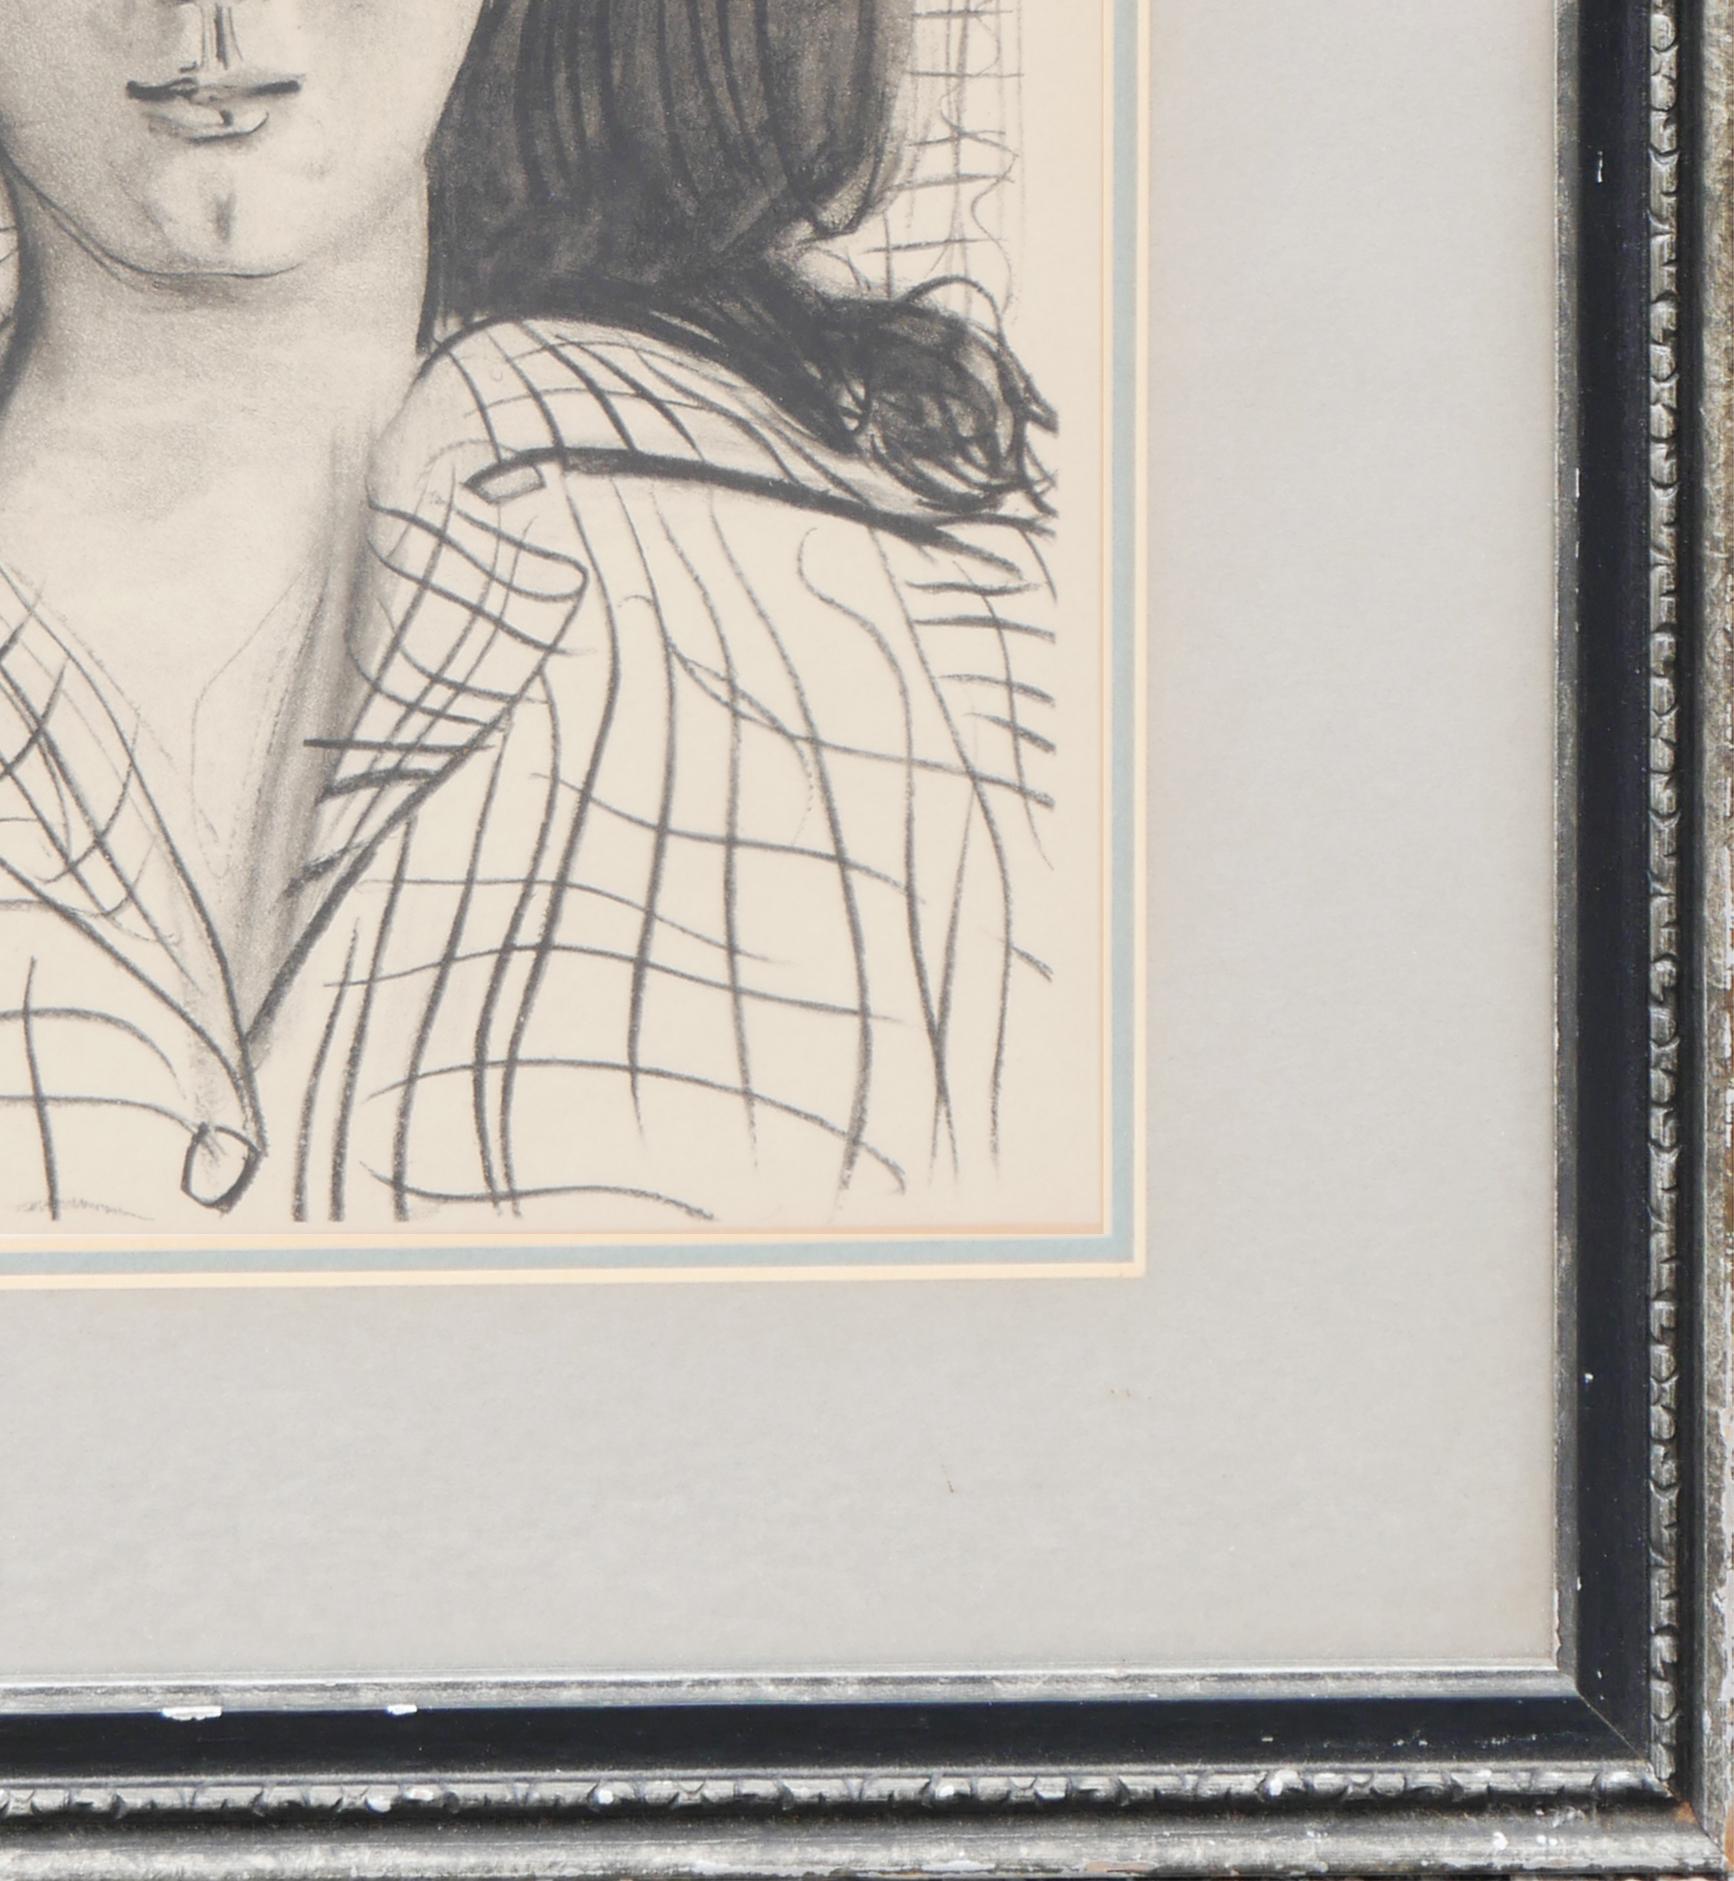 Modern black and white print of a dark haired woman by the renowned Spanish artist Pablo Picasso. The work features a central female figure, his wife Jacqueline Roque who he married in 1961, wearing a checkered shirt. Signed within the print in the